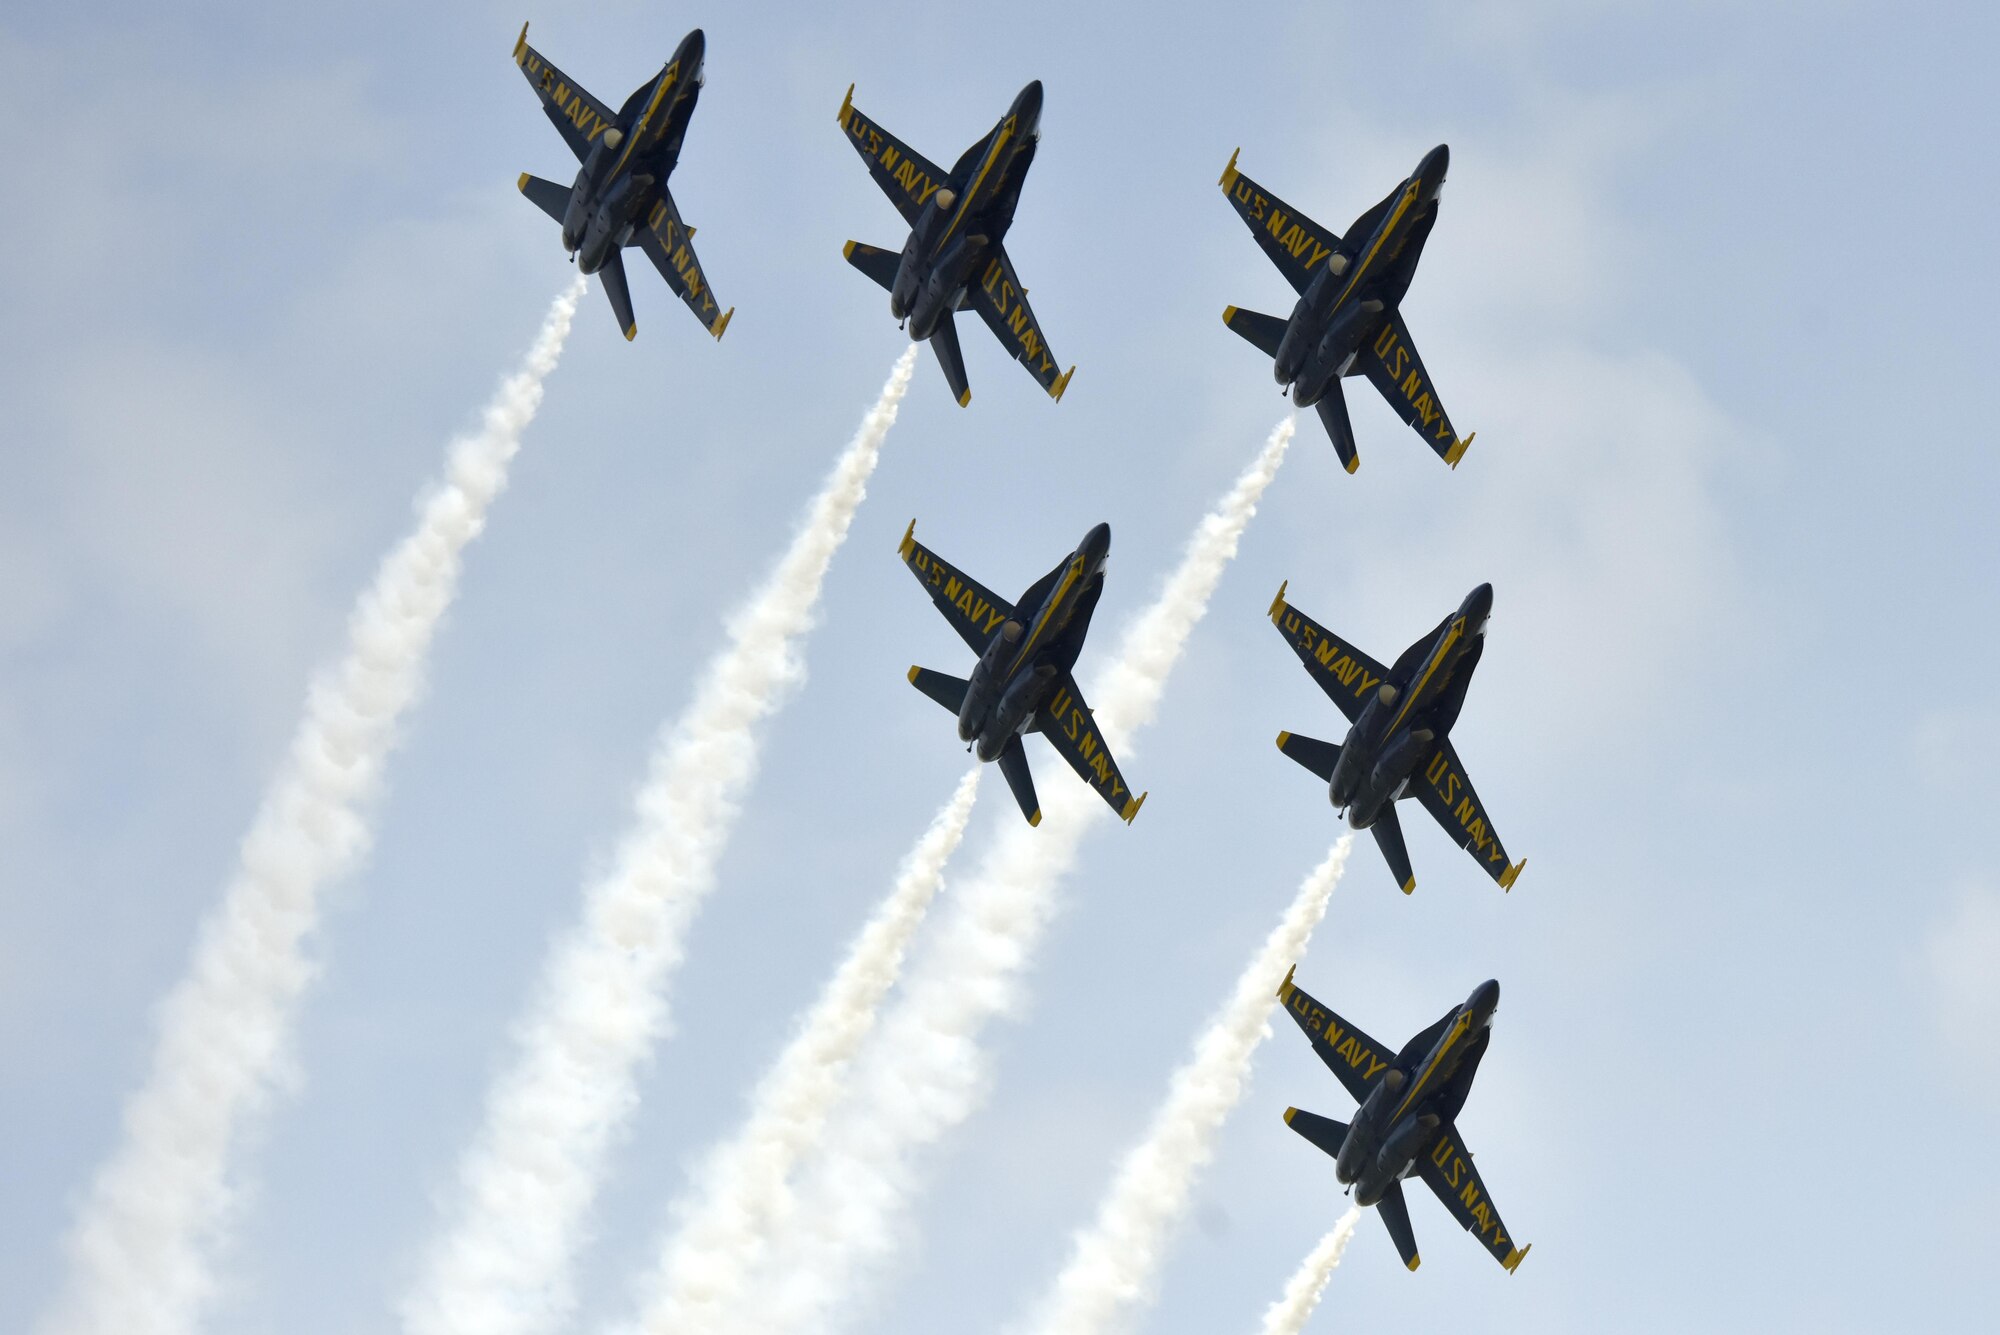 The U.S. Navy Blue Angels fly in formation during the Wings Over Wayne Air Show, May 21, 2017, at Seymour Johnson Air Force Base, North Carolina. Seymour Johnson AFB hosted the free, two-day air show as a way to thank the public and local community for their ongoing support of the base’s missions. (U.S. Air Force photo by Airman 1st Class Christopher Maldonado)